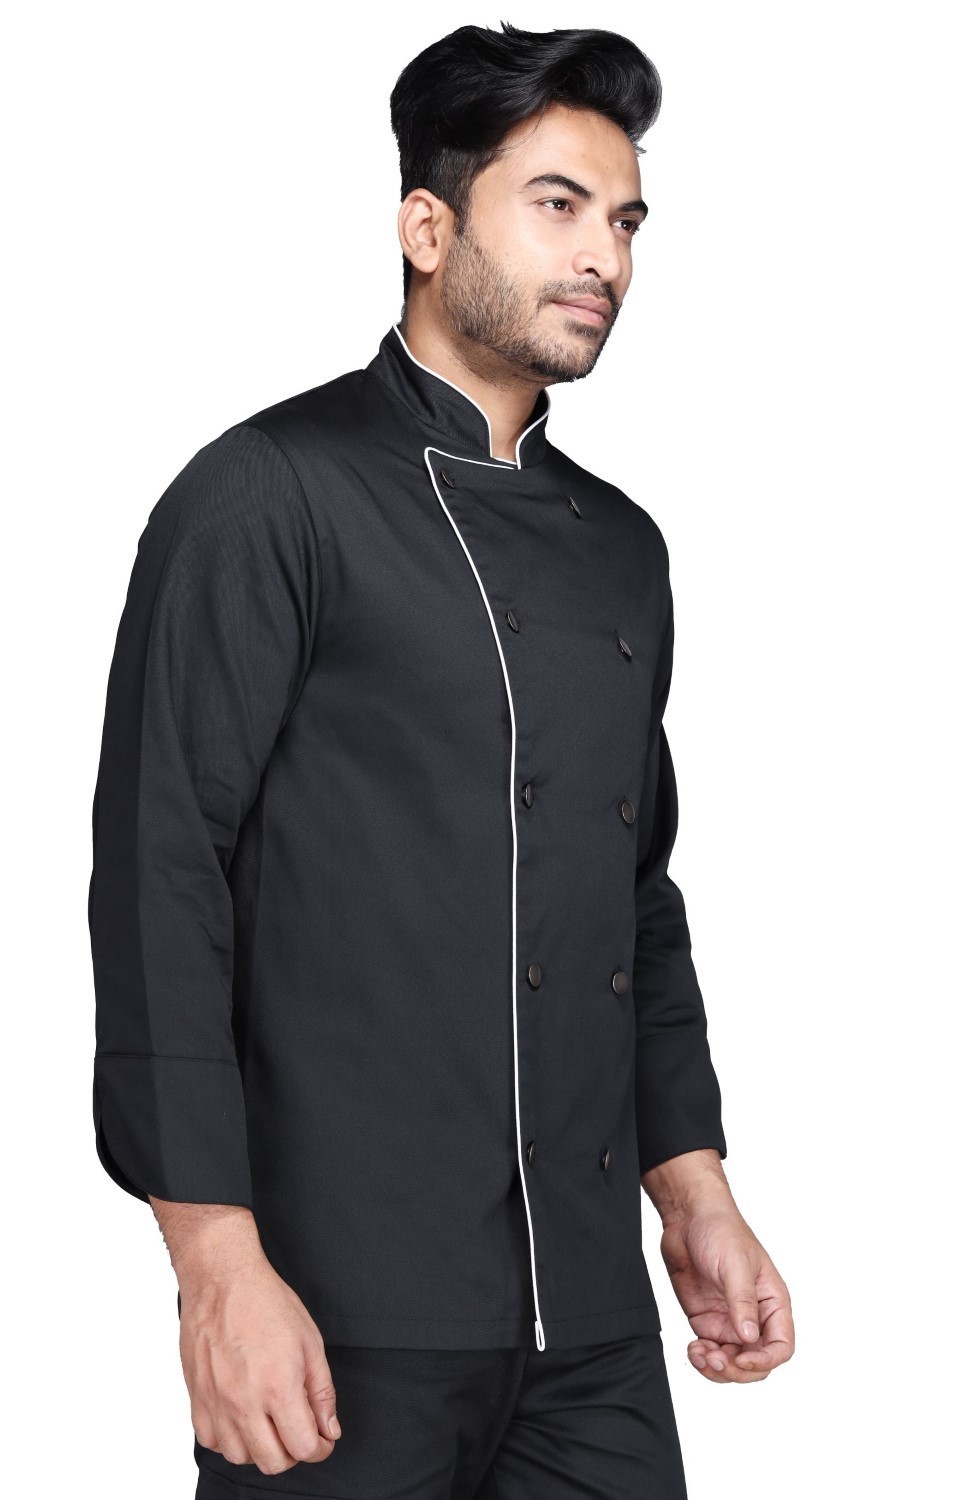 Comfortable and professional chef coat. Cool and sweat absorbent cotton blend fabric.